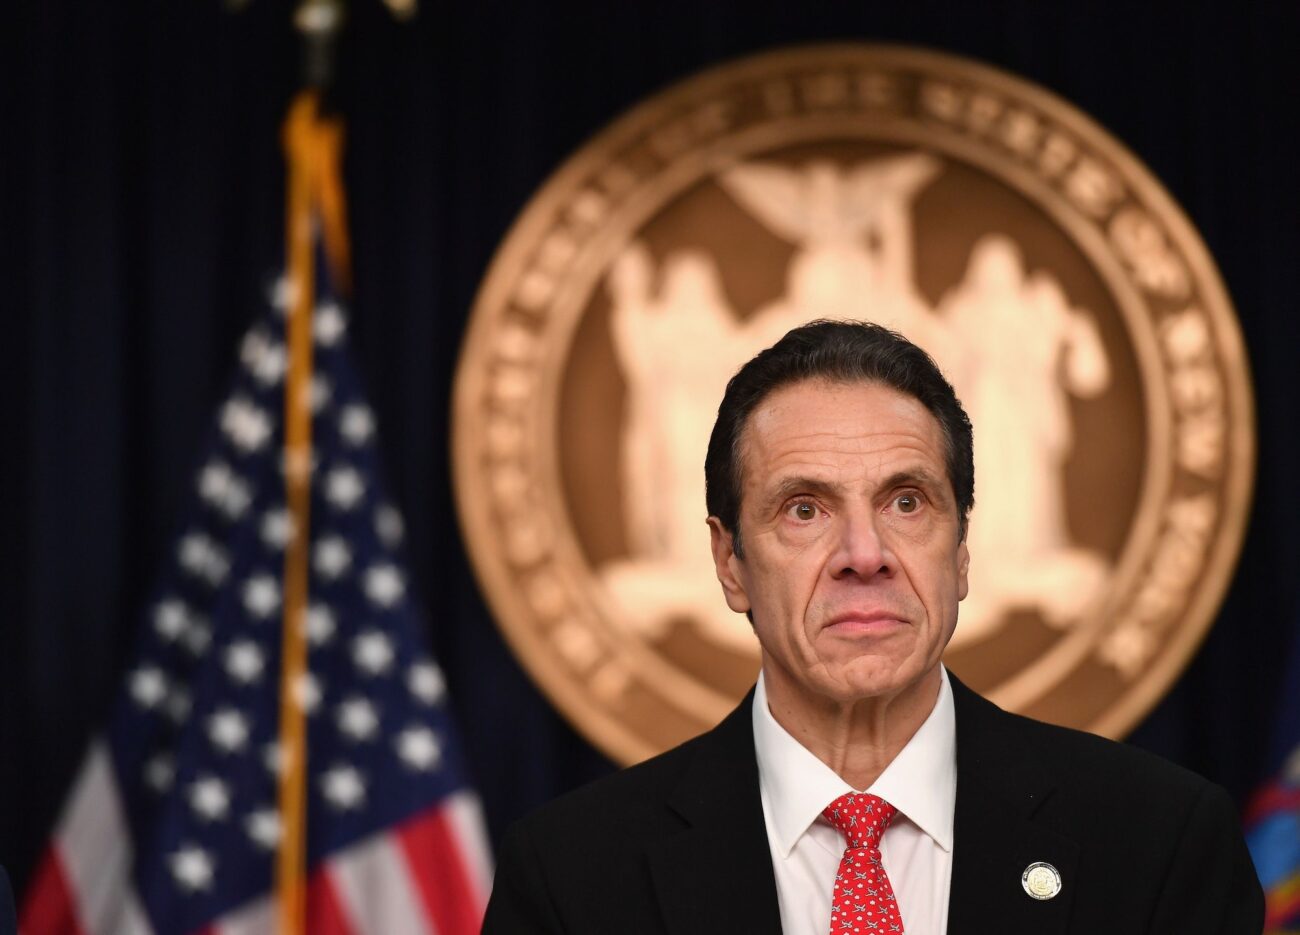 Andrew Cuomo is officially under investigation regarding coronavirus scandals, but why? Read all about the pressing details surrounding the case here.